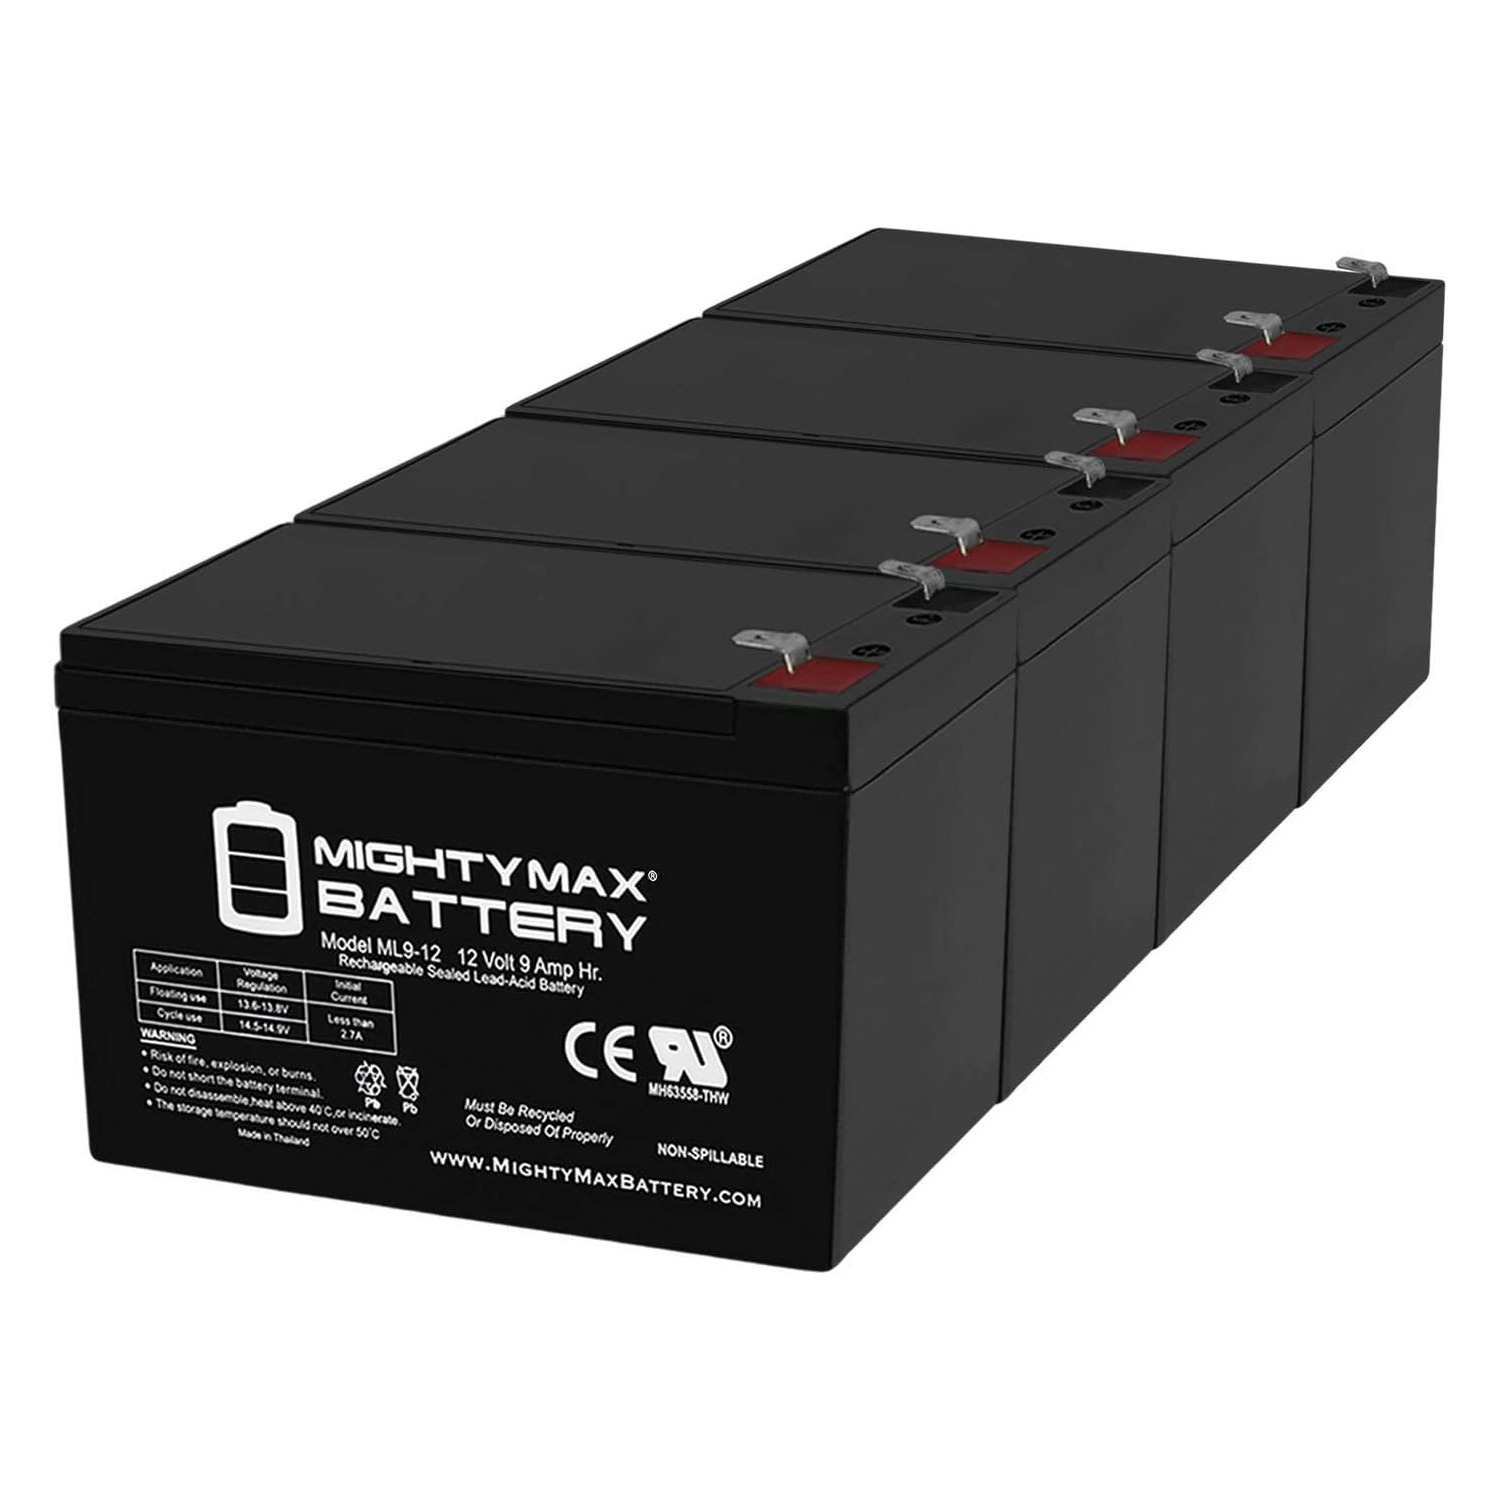 Altronix SMP5PMCTXPD8CB 12V, 9Ah Lead Acid Battery - 4 Pack